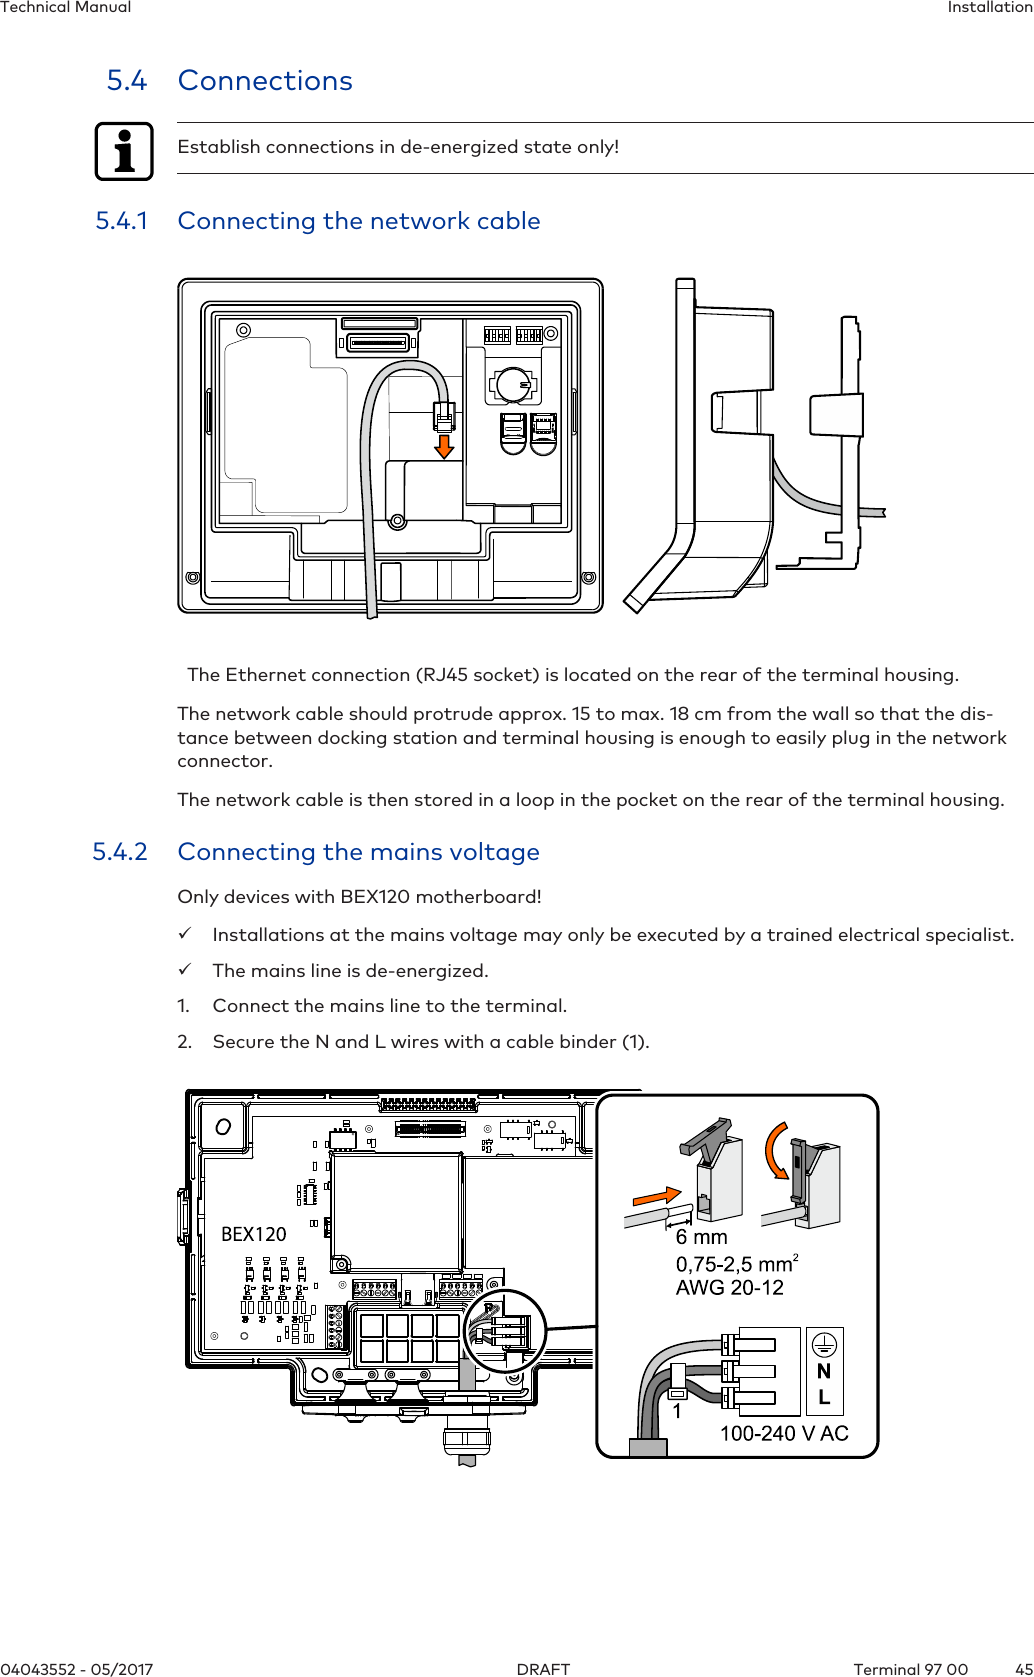 InstallationTechnical Manual4504043552 - 05/2017 Terminal 97 00DRAFT5.4 ConnectionsEstablish connections in de-energized state only!5.4.1 Connecting the network cable  The Ethernet connection (RJ45 socket) is located on the rear of the terminal housing.The network cable should protrude approx. 15 to max. 18 cm from the wall so that the dis-tance between docking station and terminal housing is enough to easily plug in the networkconnector.The network cable is then stored in a loop in the pocket on the rear of the terminal housing.5.4.2 Connecting the mains voltageOnly devices with BEX120 motherboard!üInstallations at the mains voltage may only be executed by a trained electrical specialist.üThe mains line is de-energized.1. Connect the mains line to the terminal.2. Secure the N and L wires with a cable binder (1).